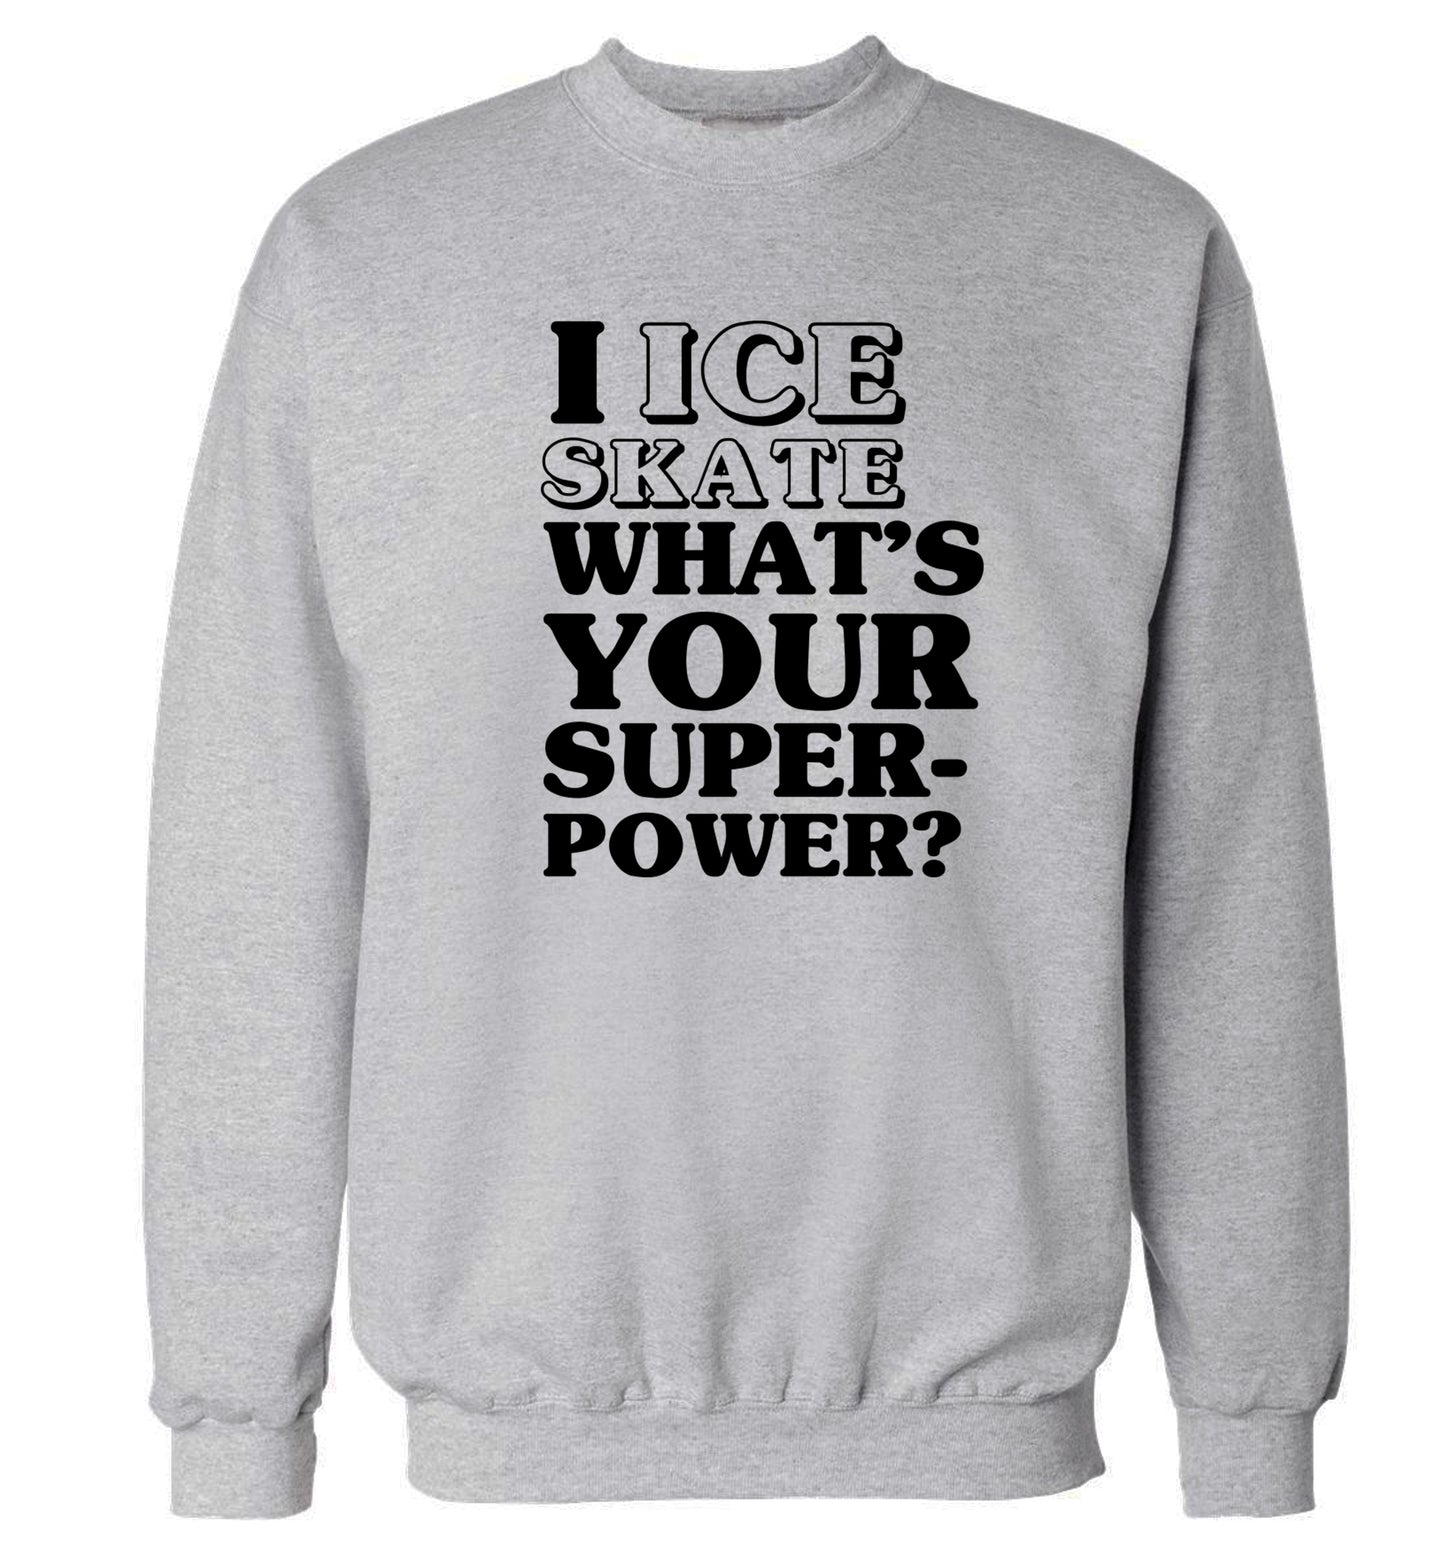 I ice skate what's your superpower? Adult's unisexgrey Sweater 2XL